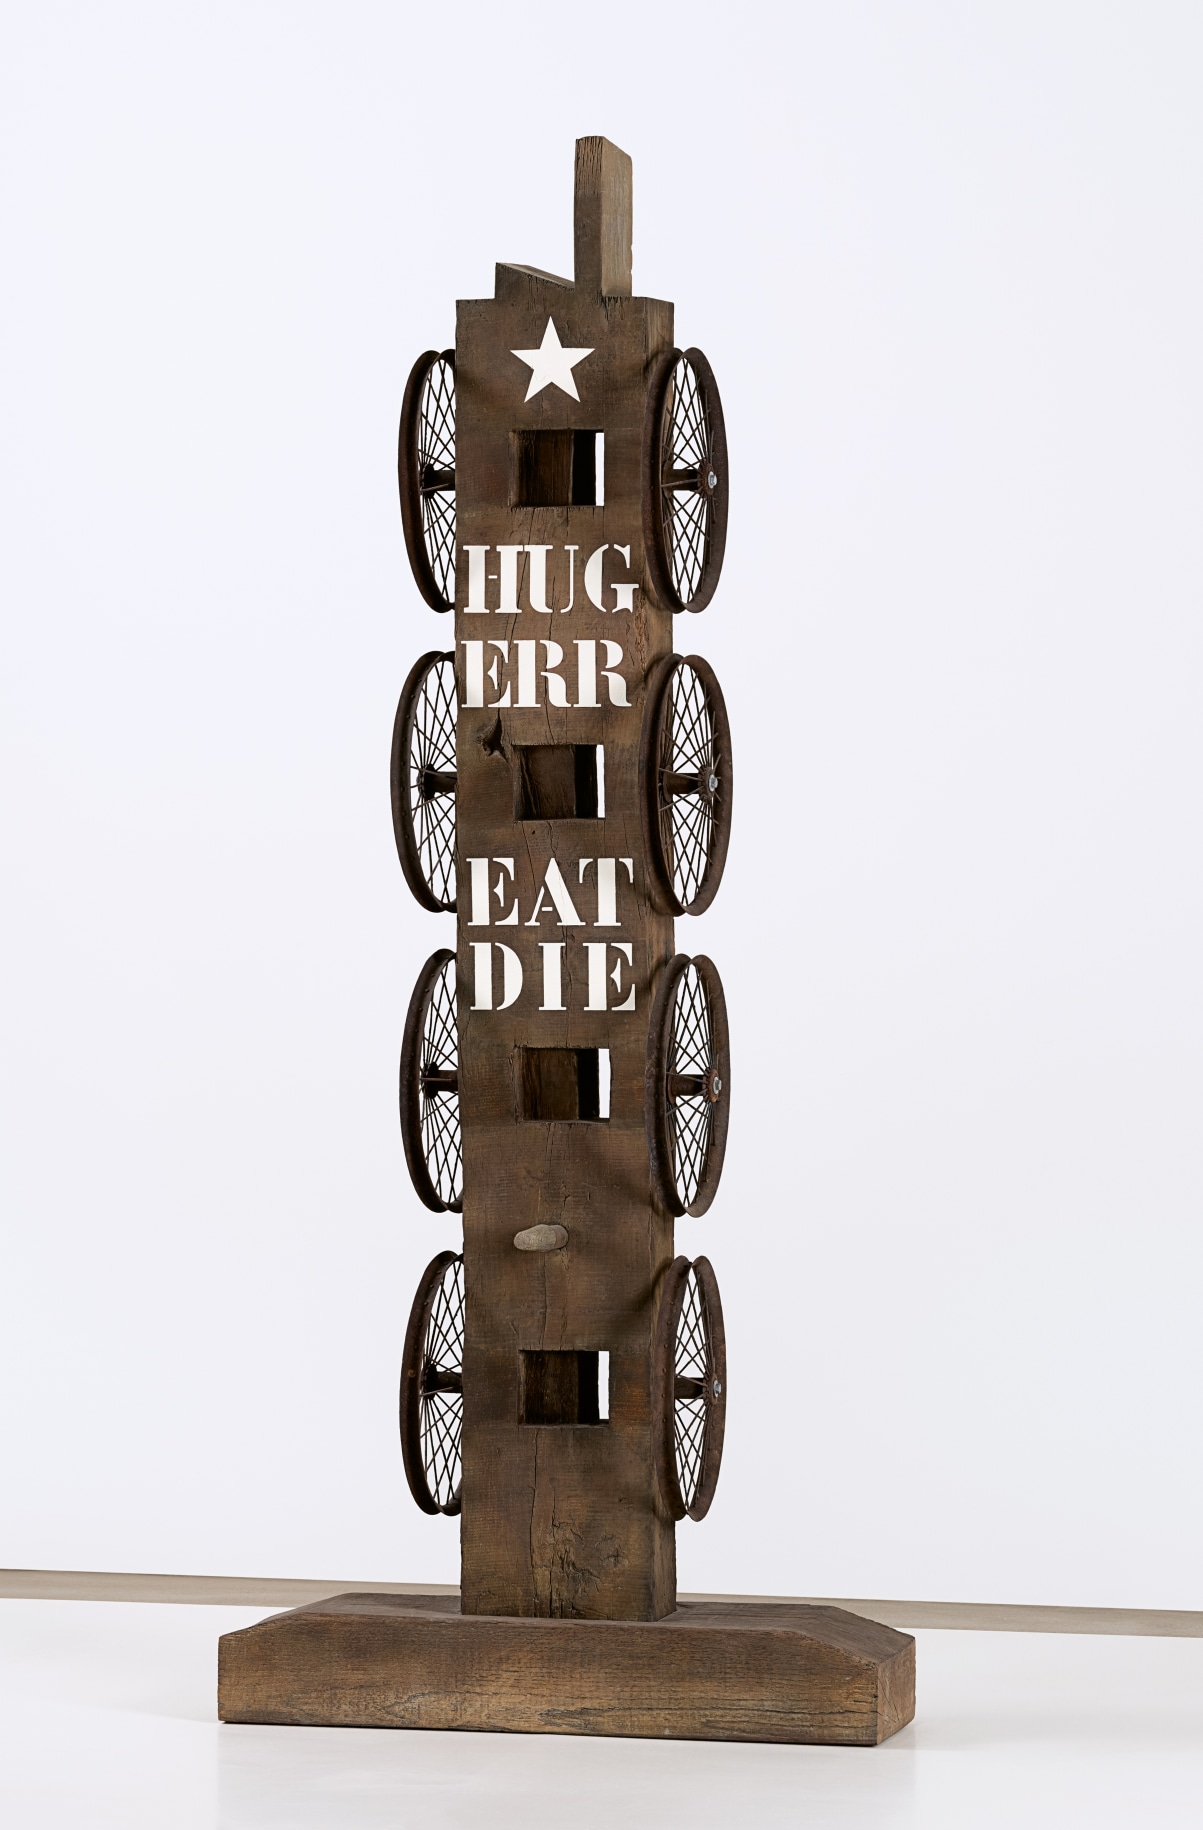 A 83 7/8 by 35 1/2 by 11 13/16 inch painted bronze sculpture consisting of a beam with a haunched tenon on a base. Four wheels run down the left and right sides of the sculpture. At the front top is a white star, below it the words &quot;Hug,&quot; &quot;Err,&quot; &quot;Eat,&quot; and &quot;Die&quot; are painted in white stenciled letters.